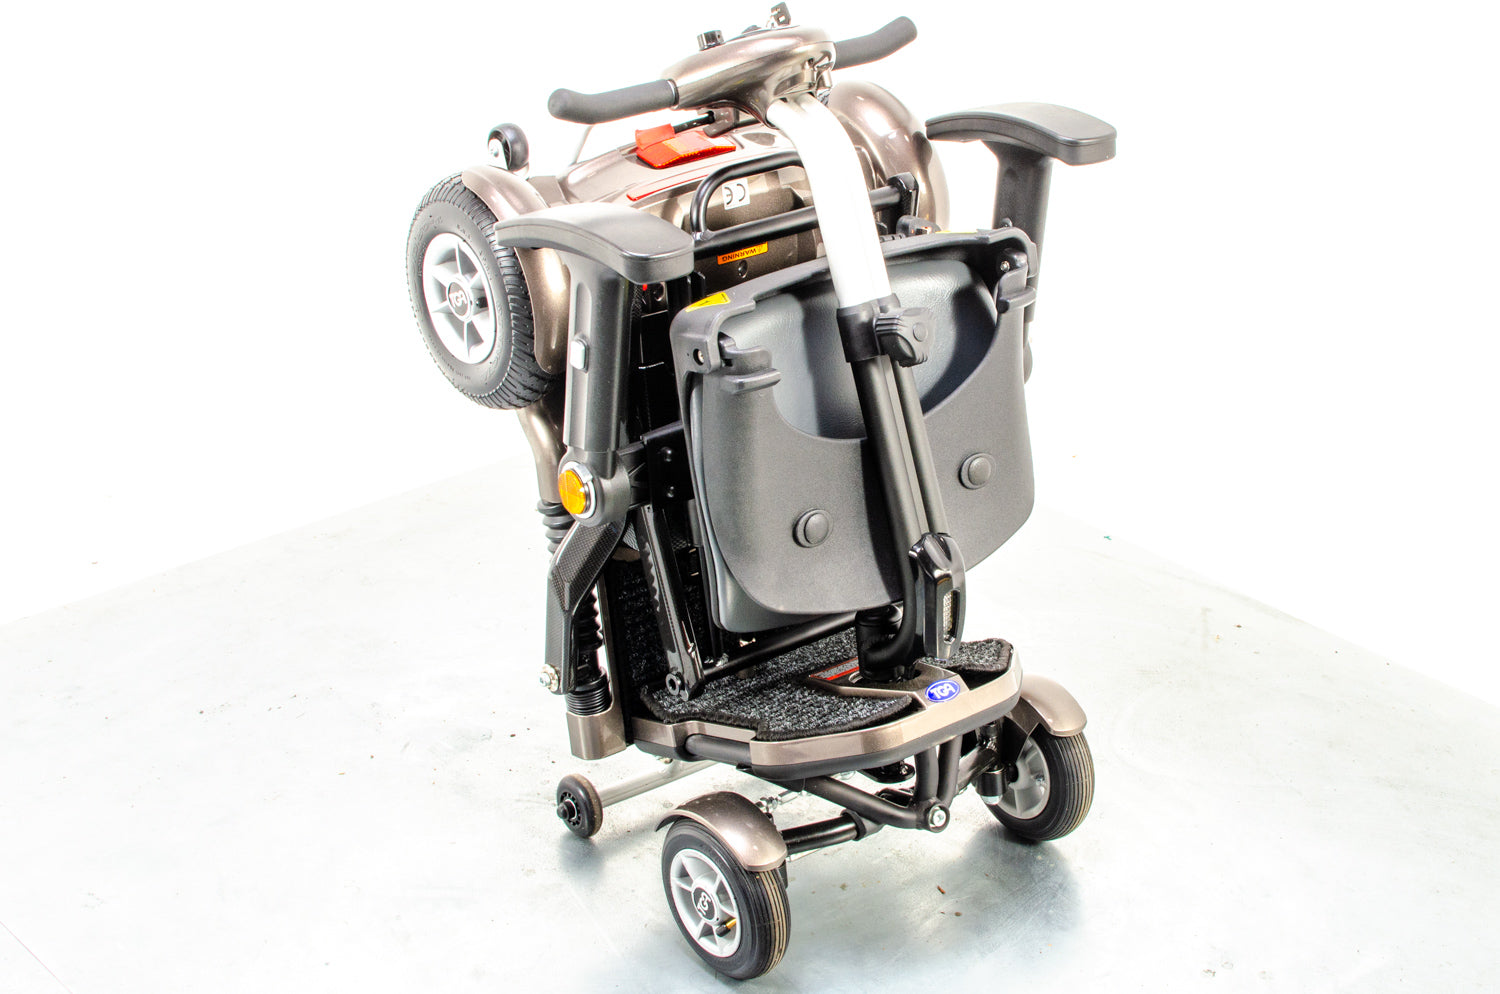 TGA Minimo Plus 4 Used Electric Mobility Scooter Lithium Compact Folding Transportable Travel